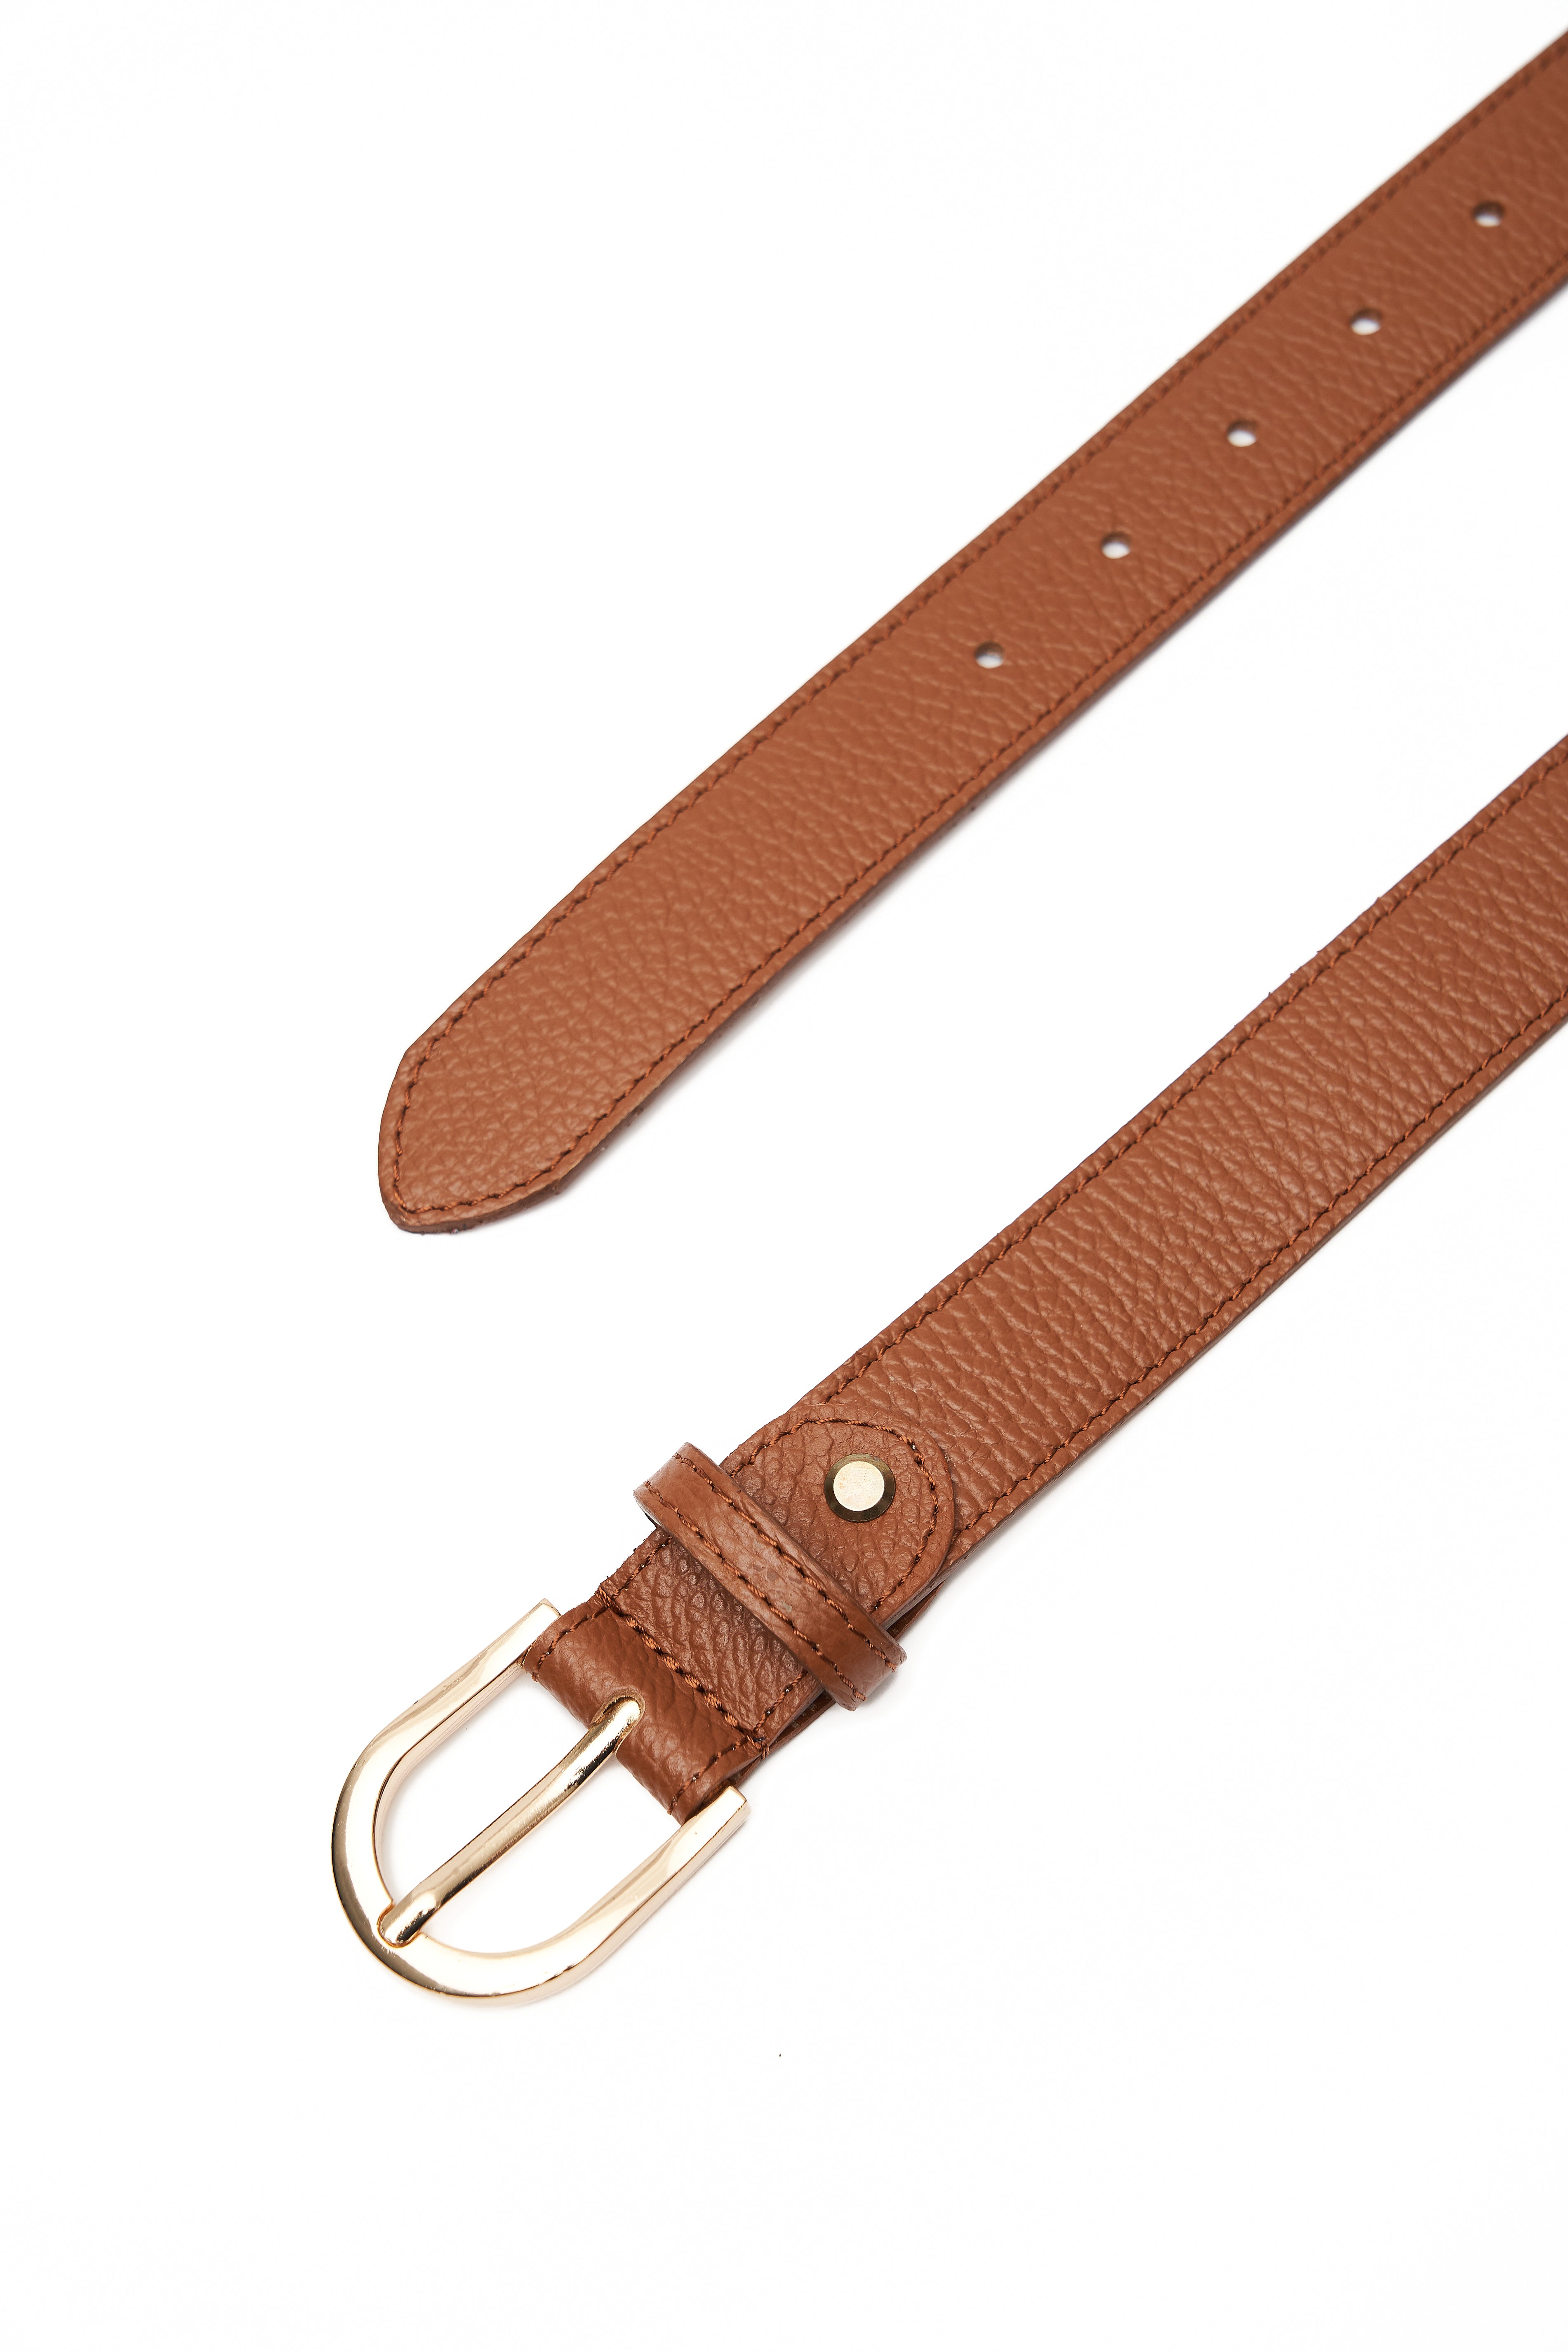 LEATHER BROWN BELT WITH GOLDEN DETAILS